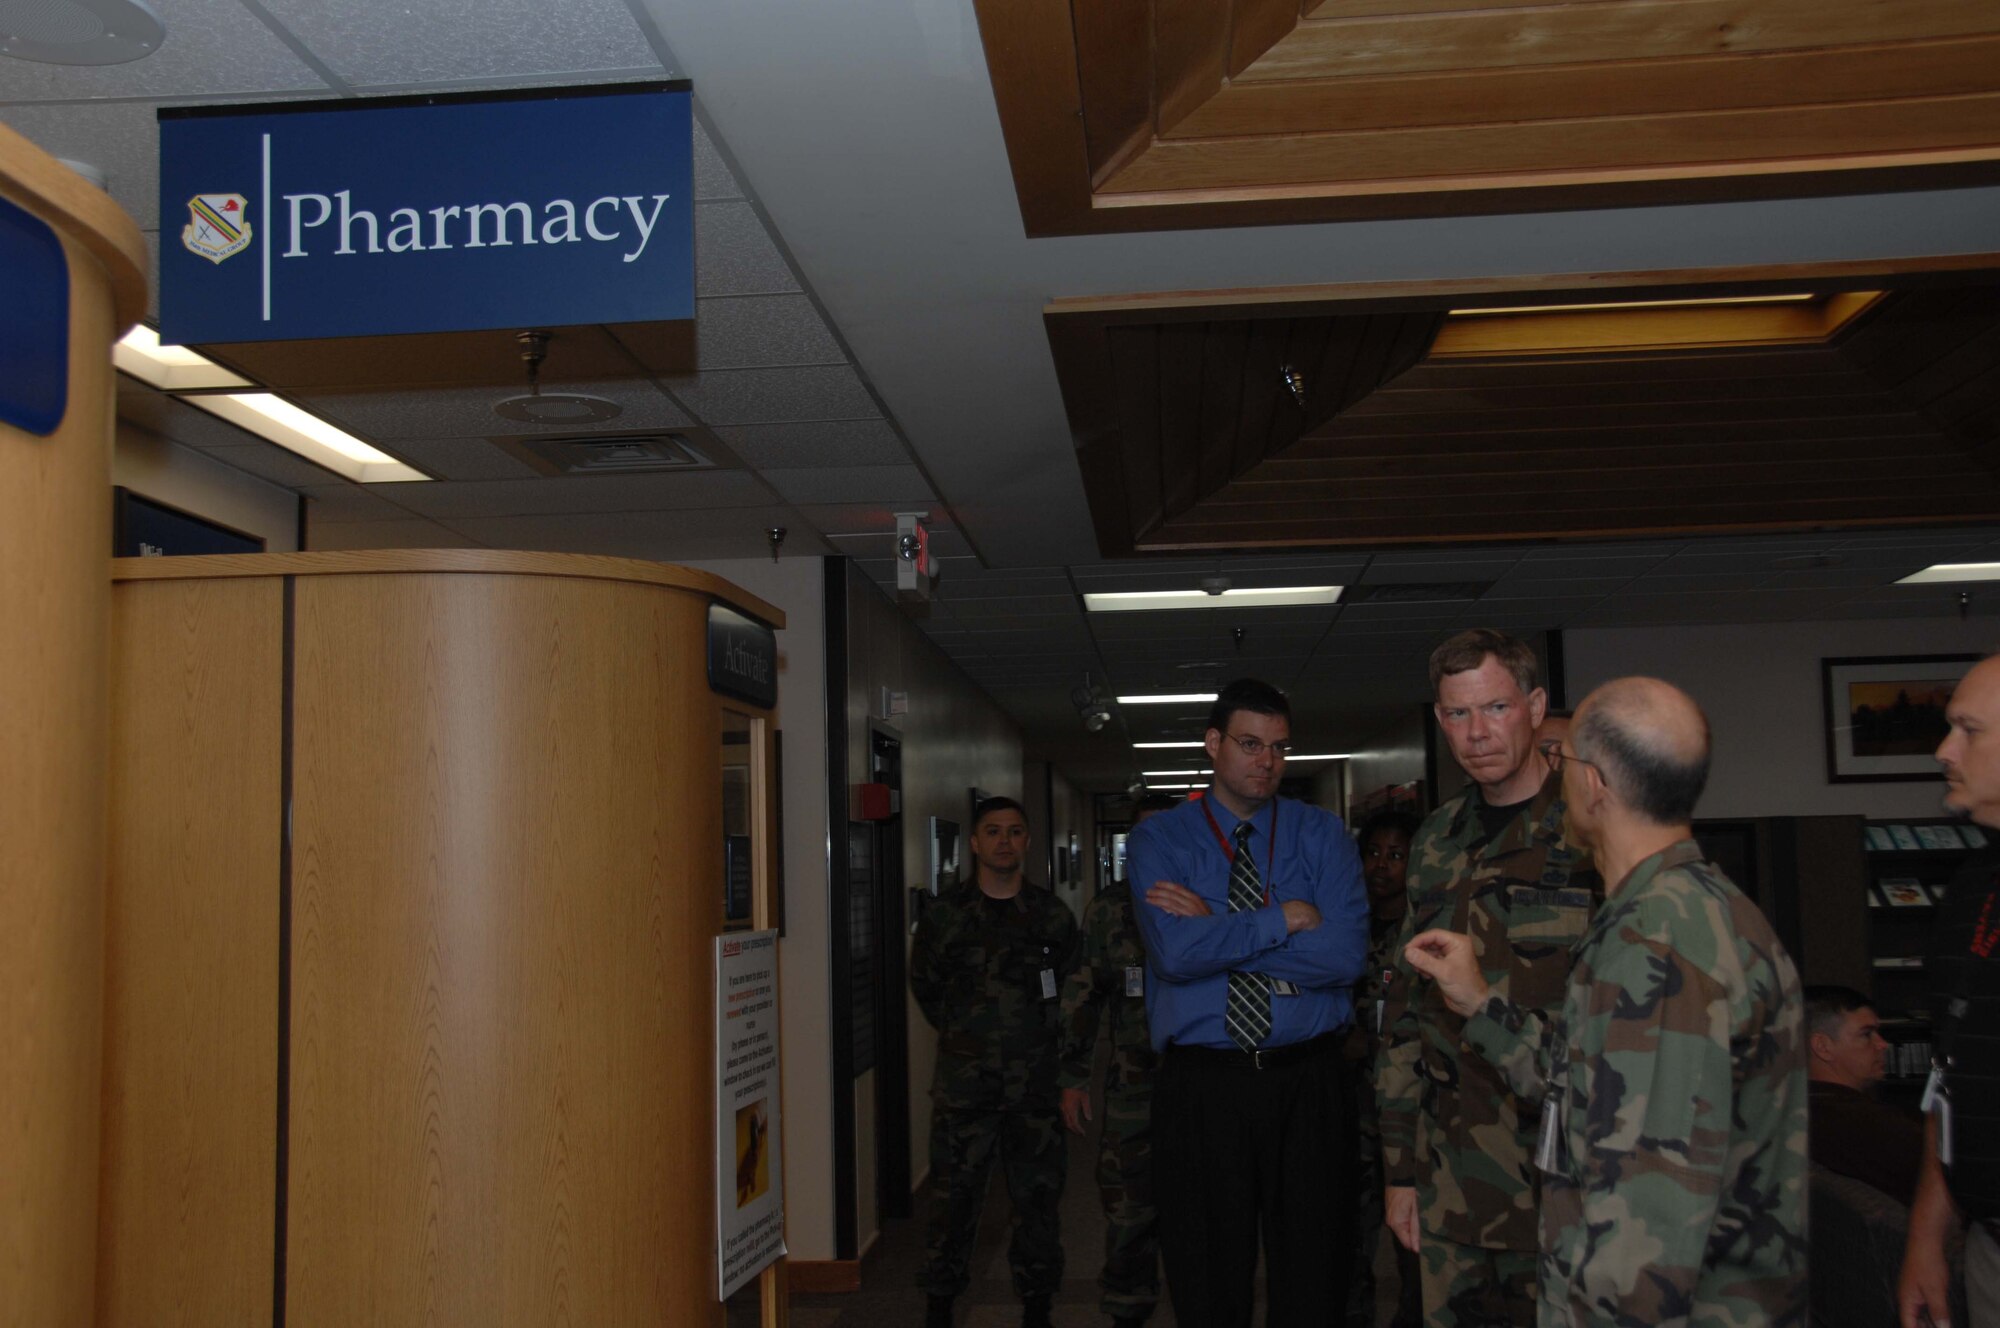 EIELSON AIR FORCE BASE, Alaska -- Maj. Gen. Del Eulberg, Air Force Civil Engineer, Headquarters U.S. Air Force, tours the 354th Medical Group Clinic during his visit to Eielson June 18.  (U.S. Air Force photo by Staff Sgt. Tia Schroeder) 